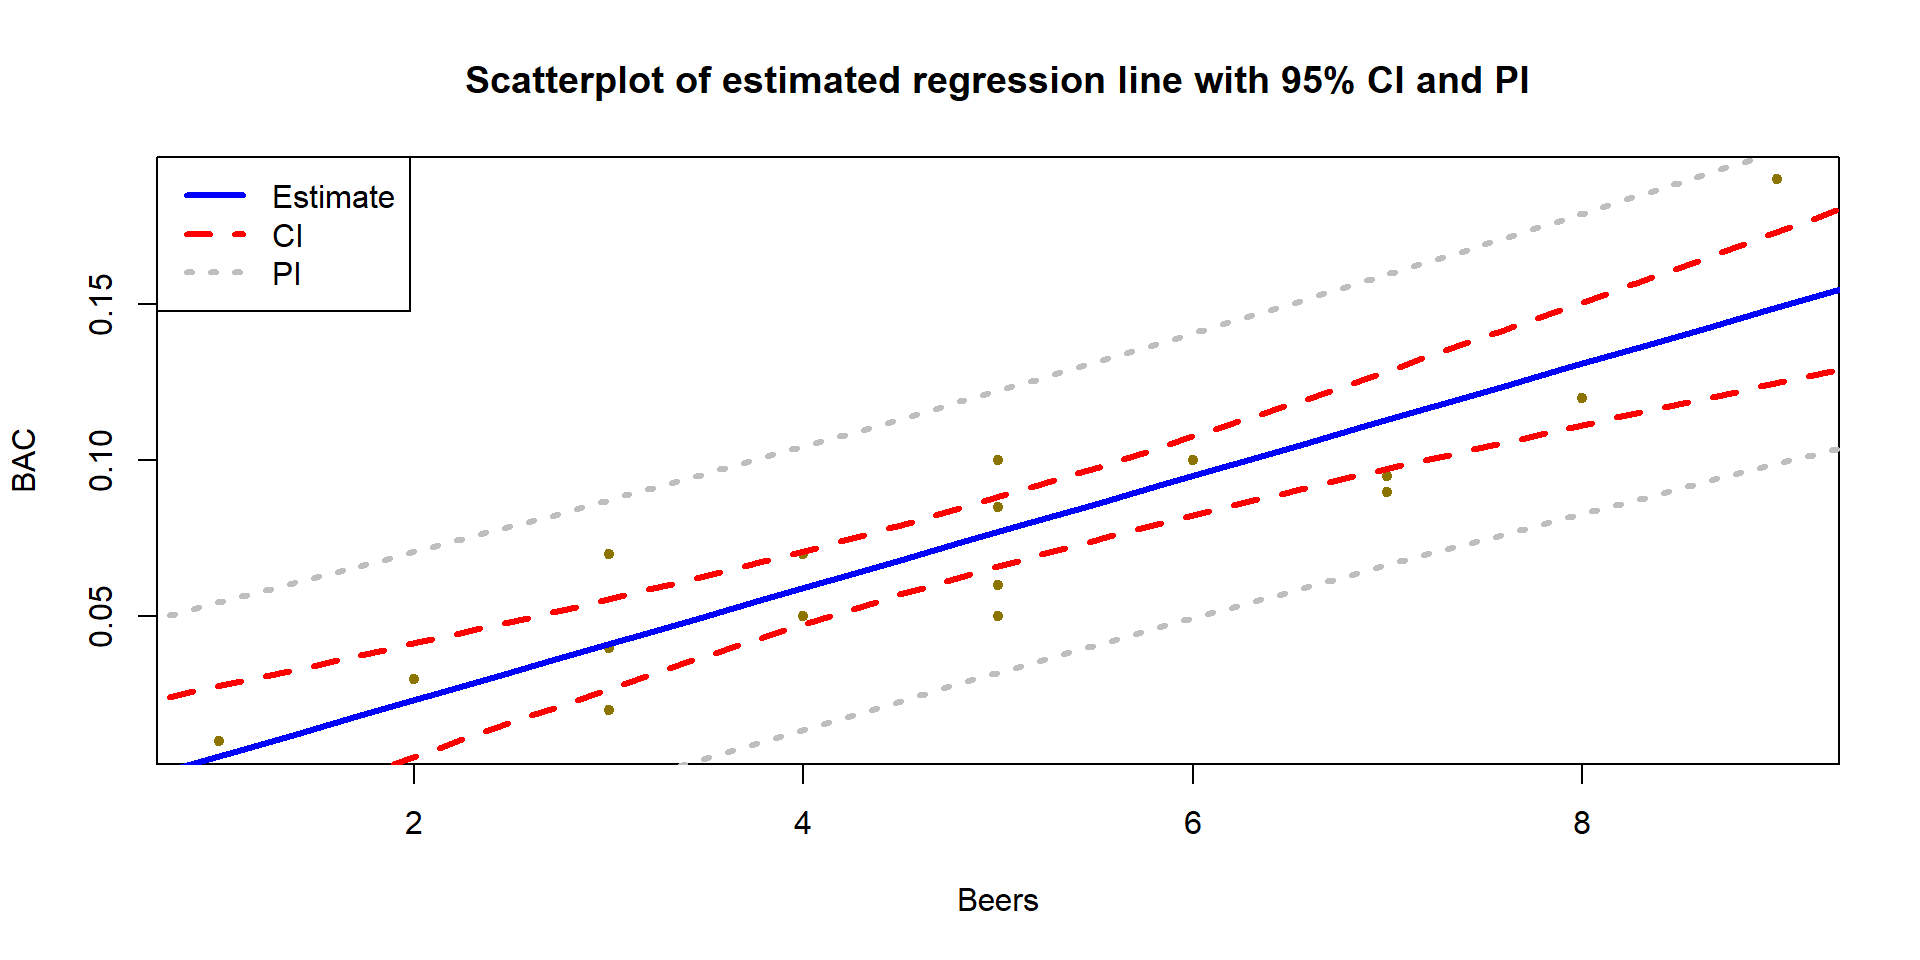 Estimated SLR for BAC data with 95% confidence (darker, dashed lines) and 95% prediction (lighter, dotted lines) intervals.